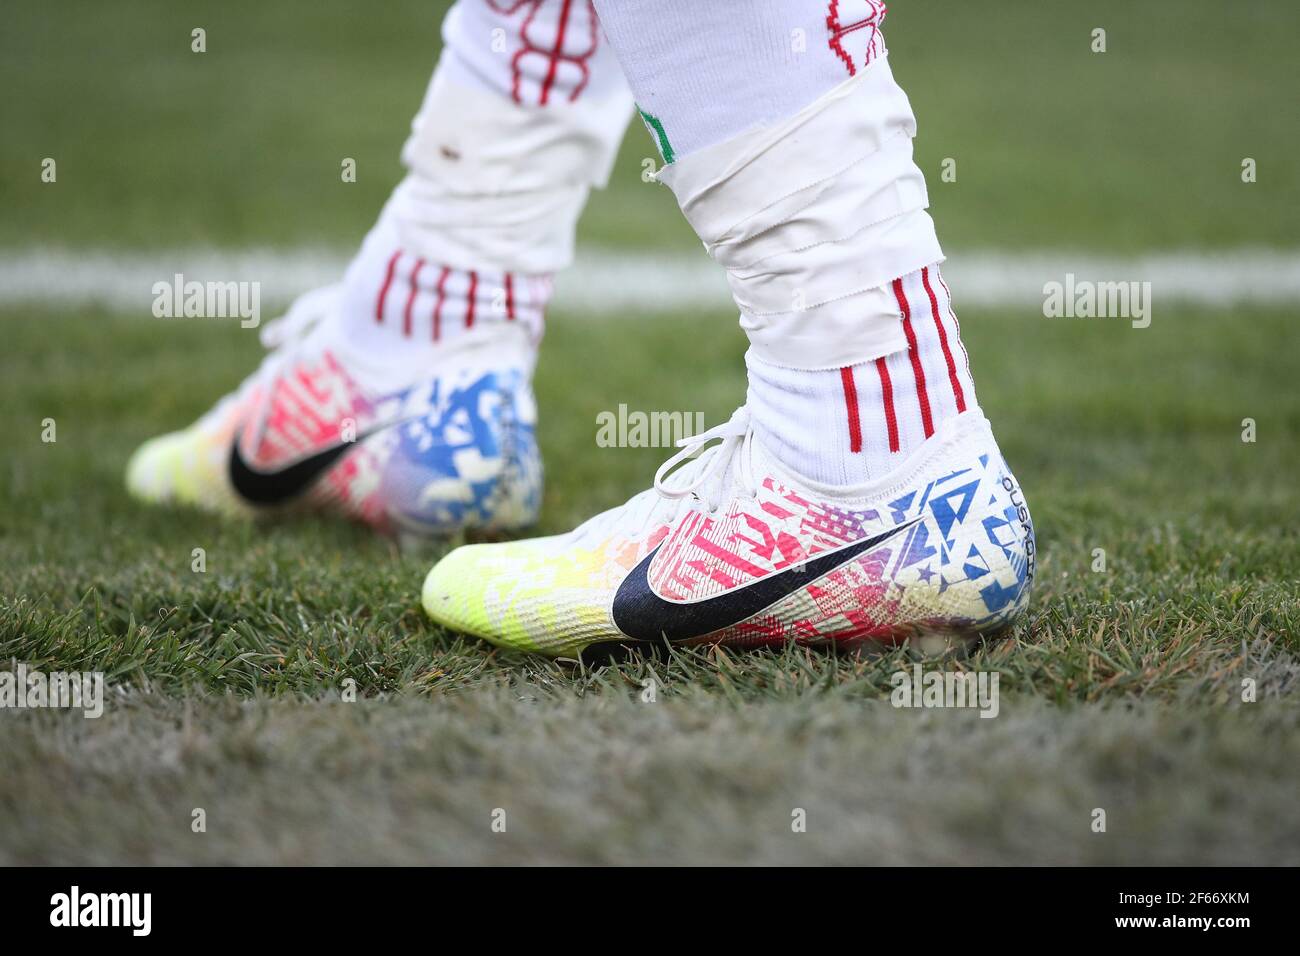 Tehran, Iran. 30th Mar, 2021. Nike sport shoes during the International  Friendly match between Iran and